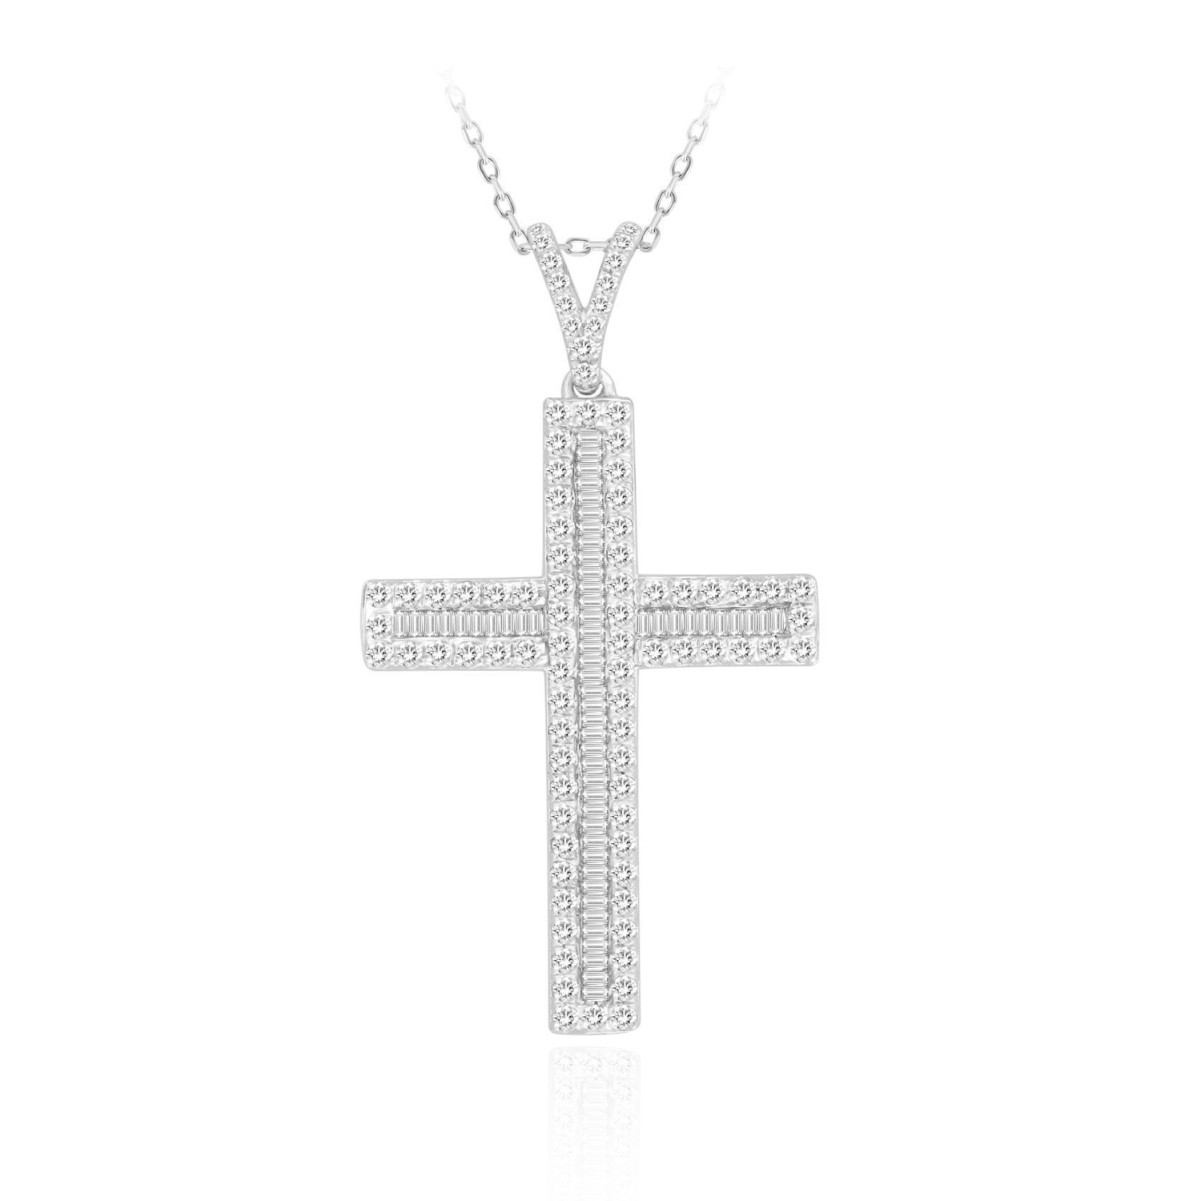 18K WHITE GOLD 1CT ROUND/BAGUETTE DIAMOND LADIES PENDANT WITH CHAIN  